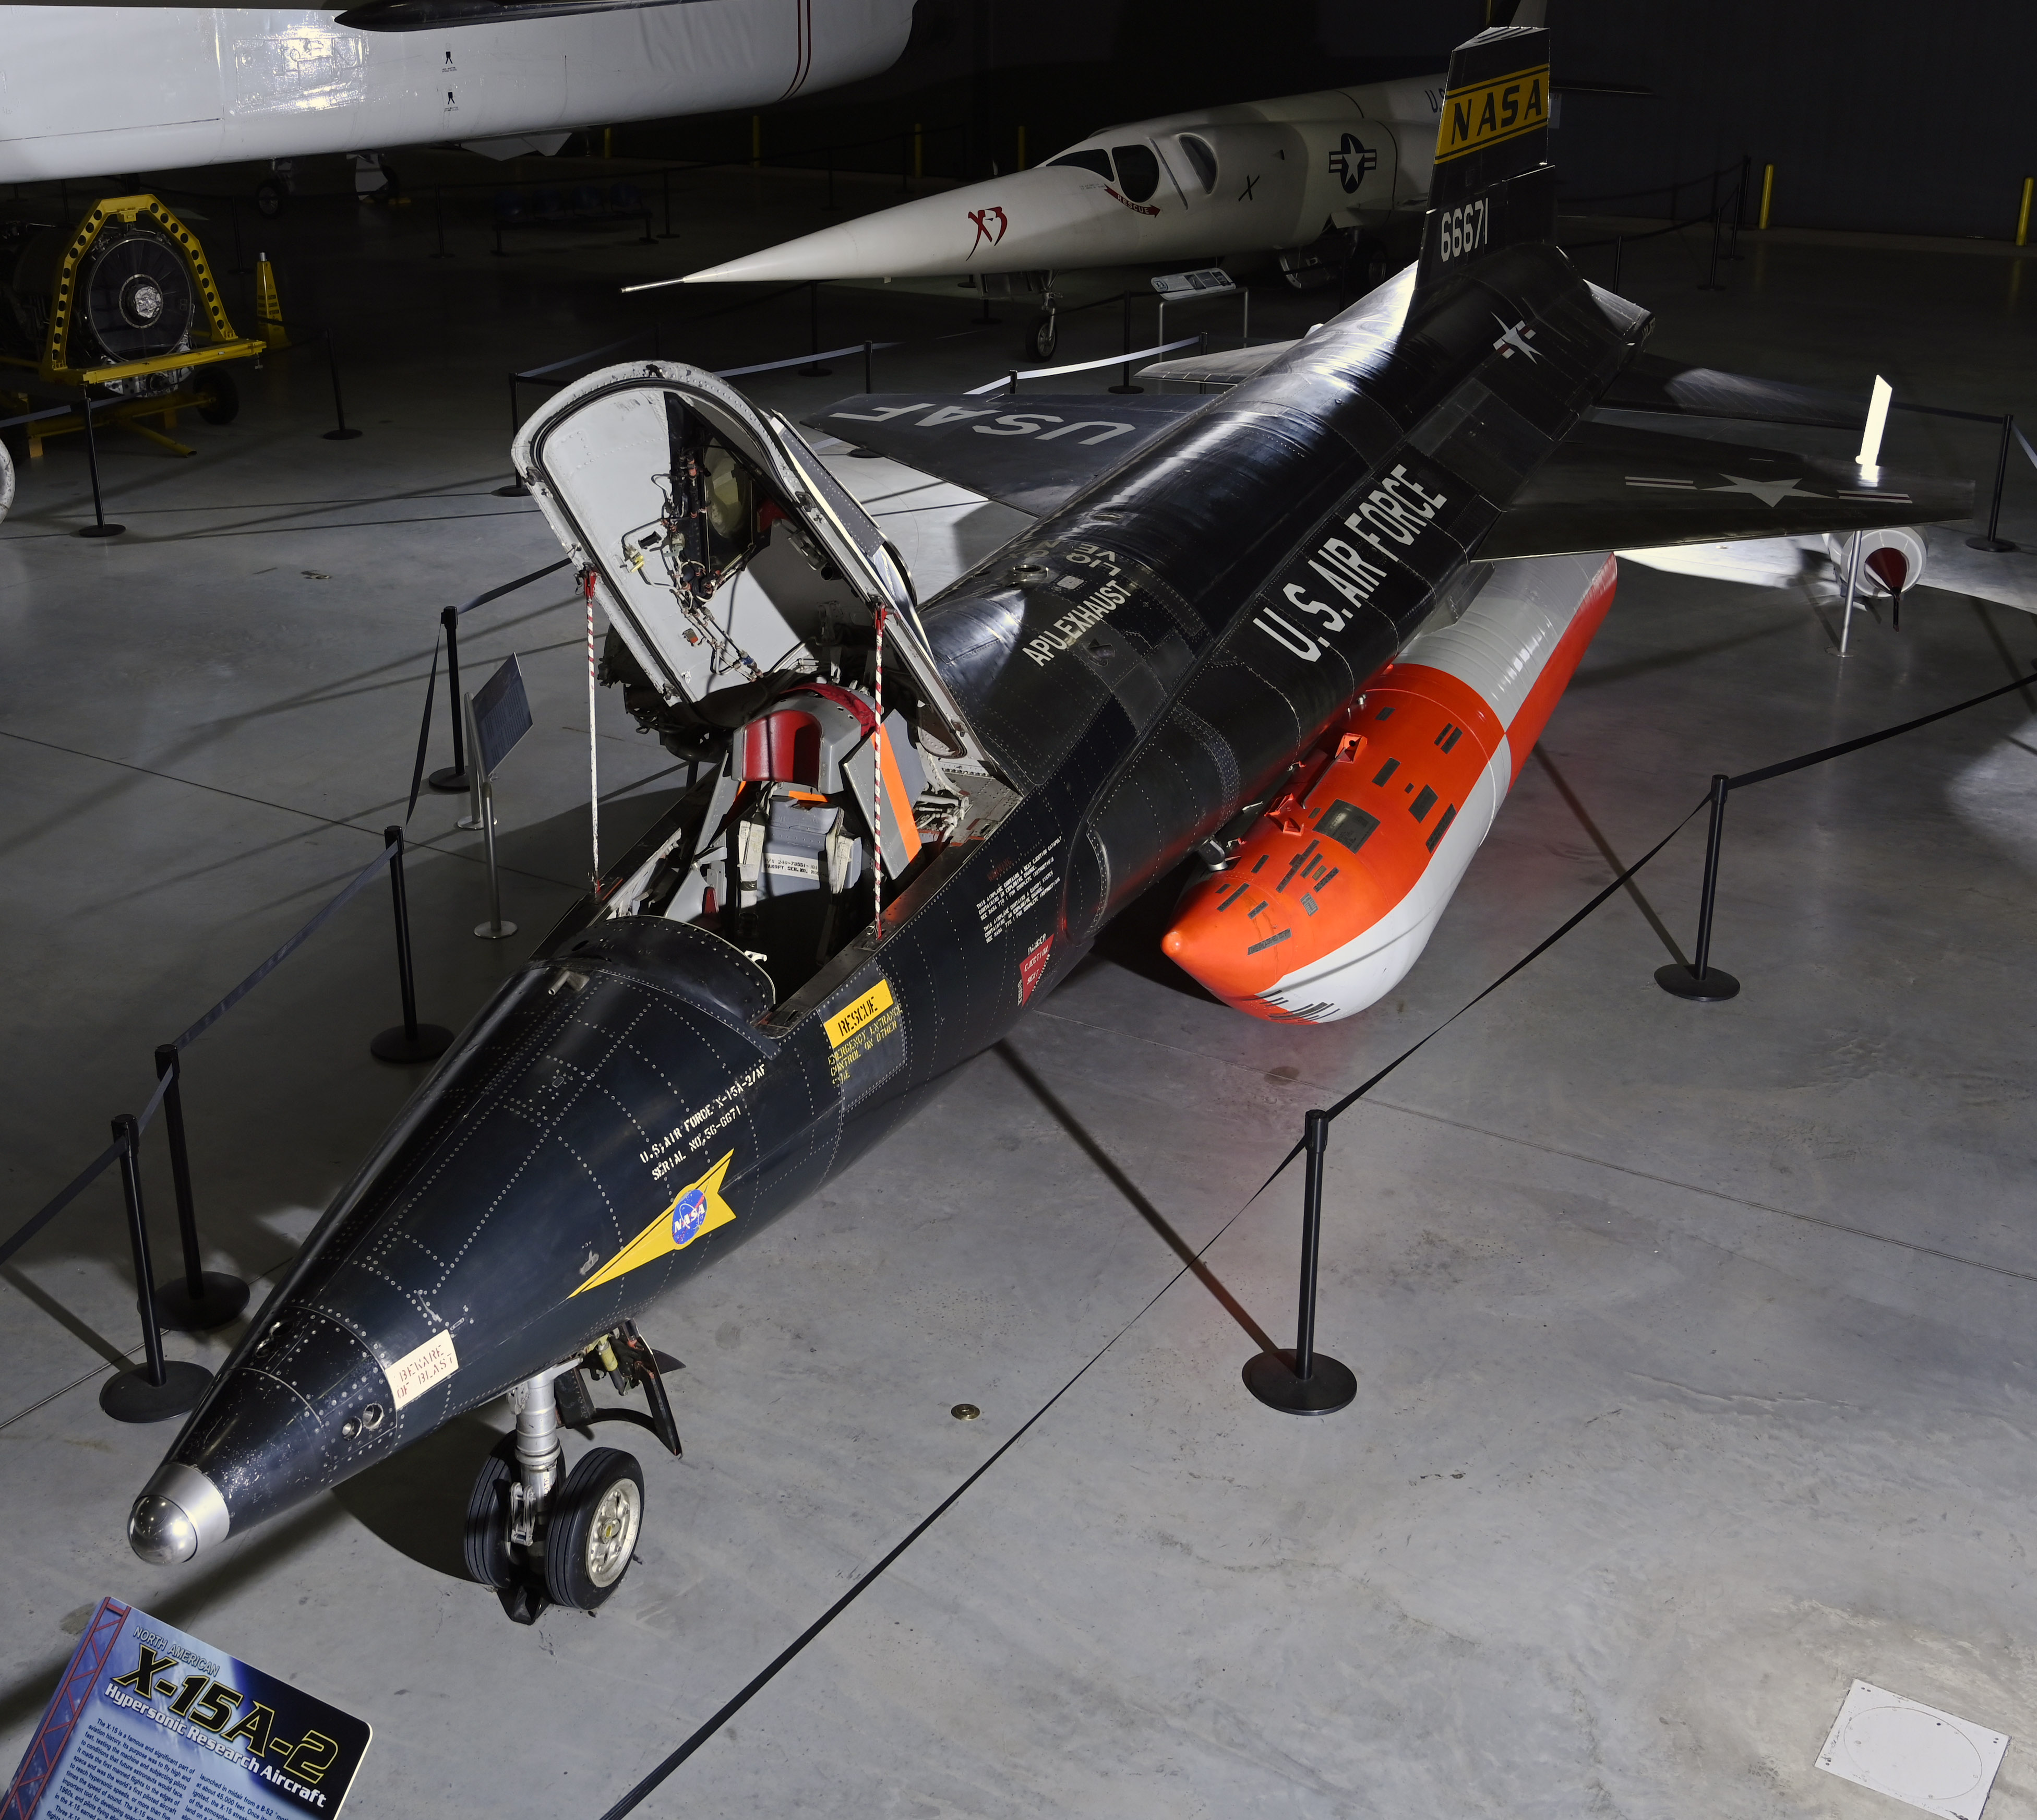 Collection 98+ Images what was the north american x-15? Superb